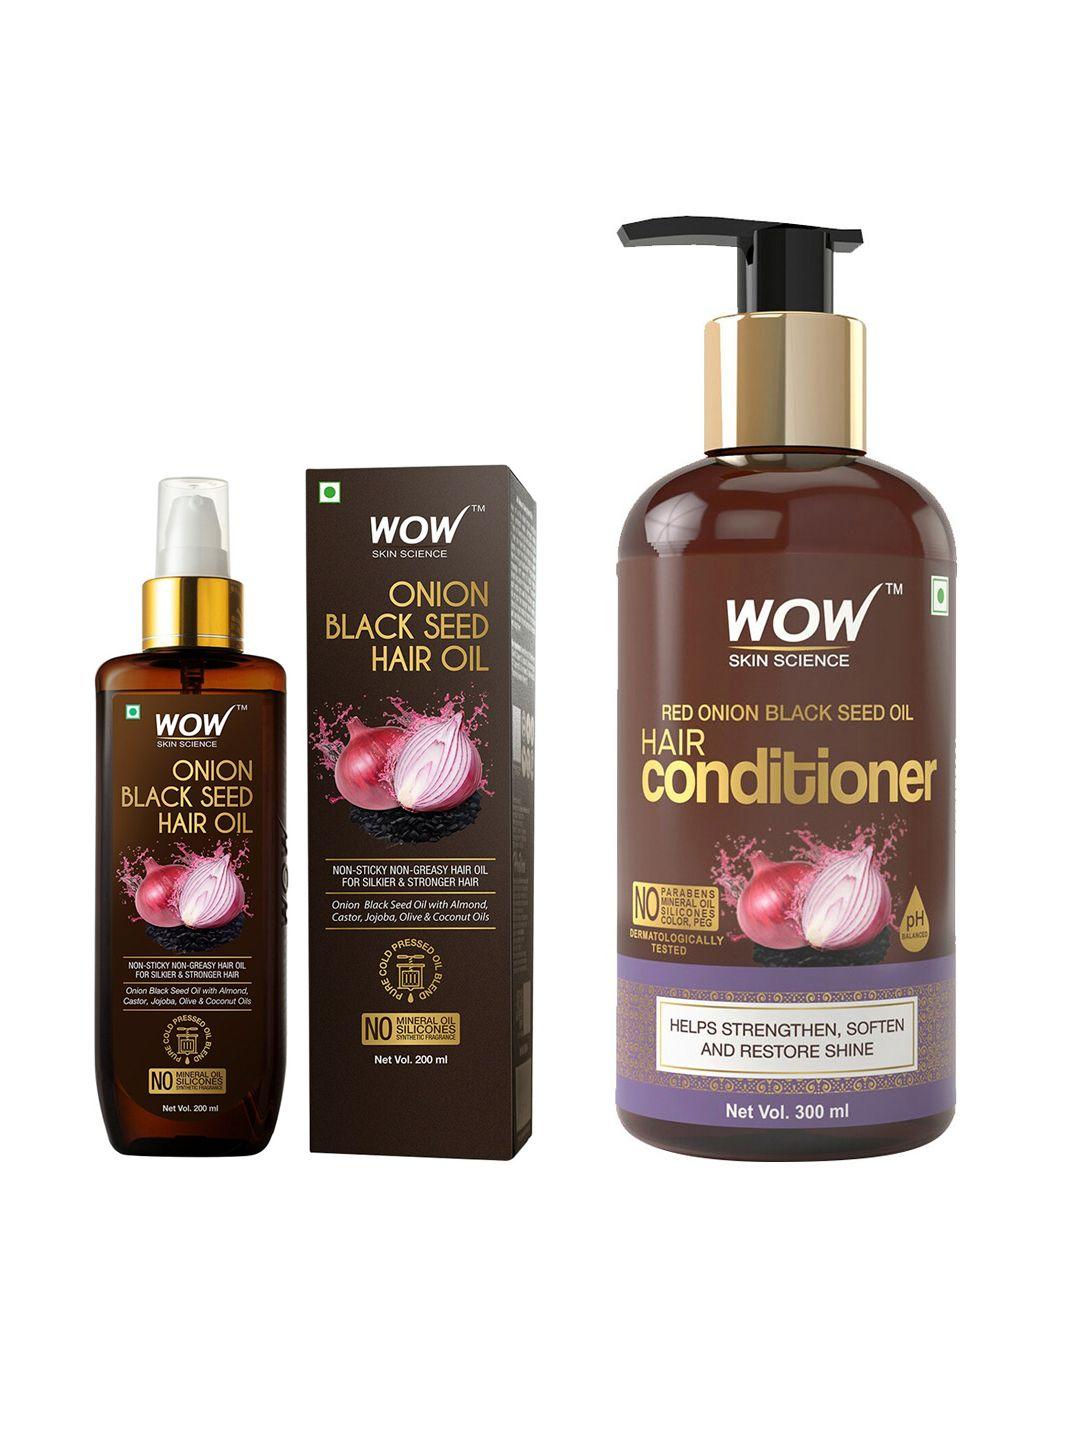 wow-skin-science-set-of-onion-black-seed-oil-hair-conditioner-&-hair-oil